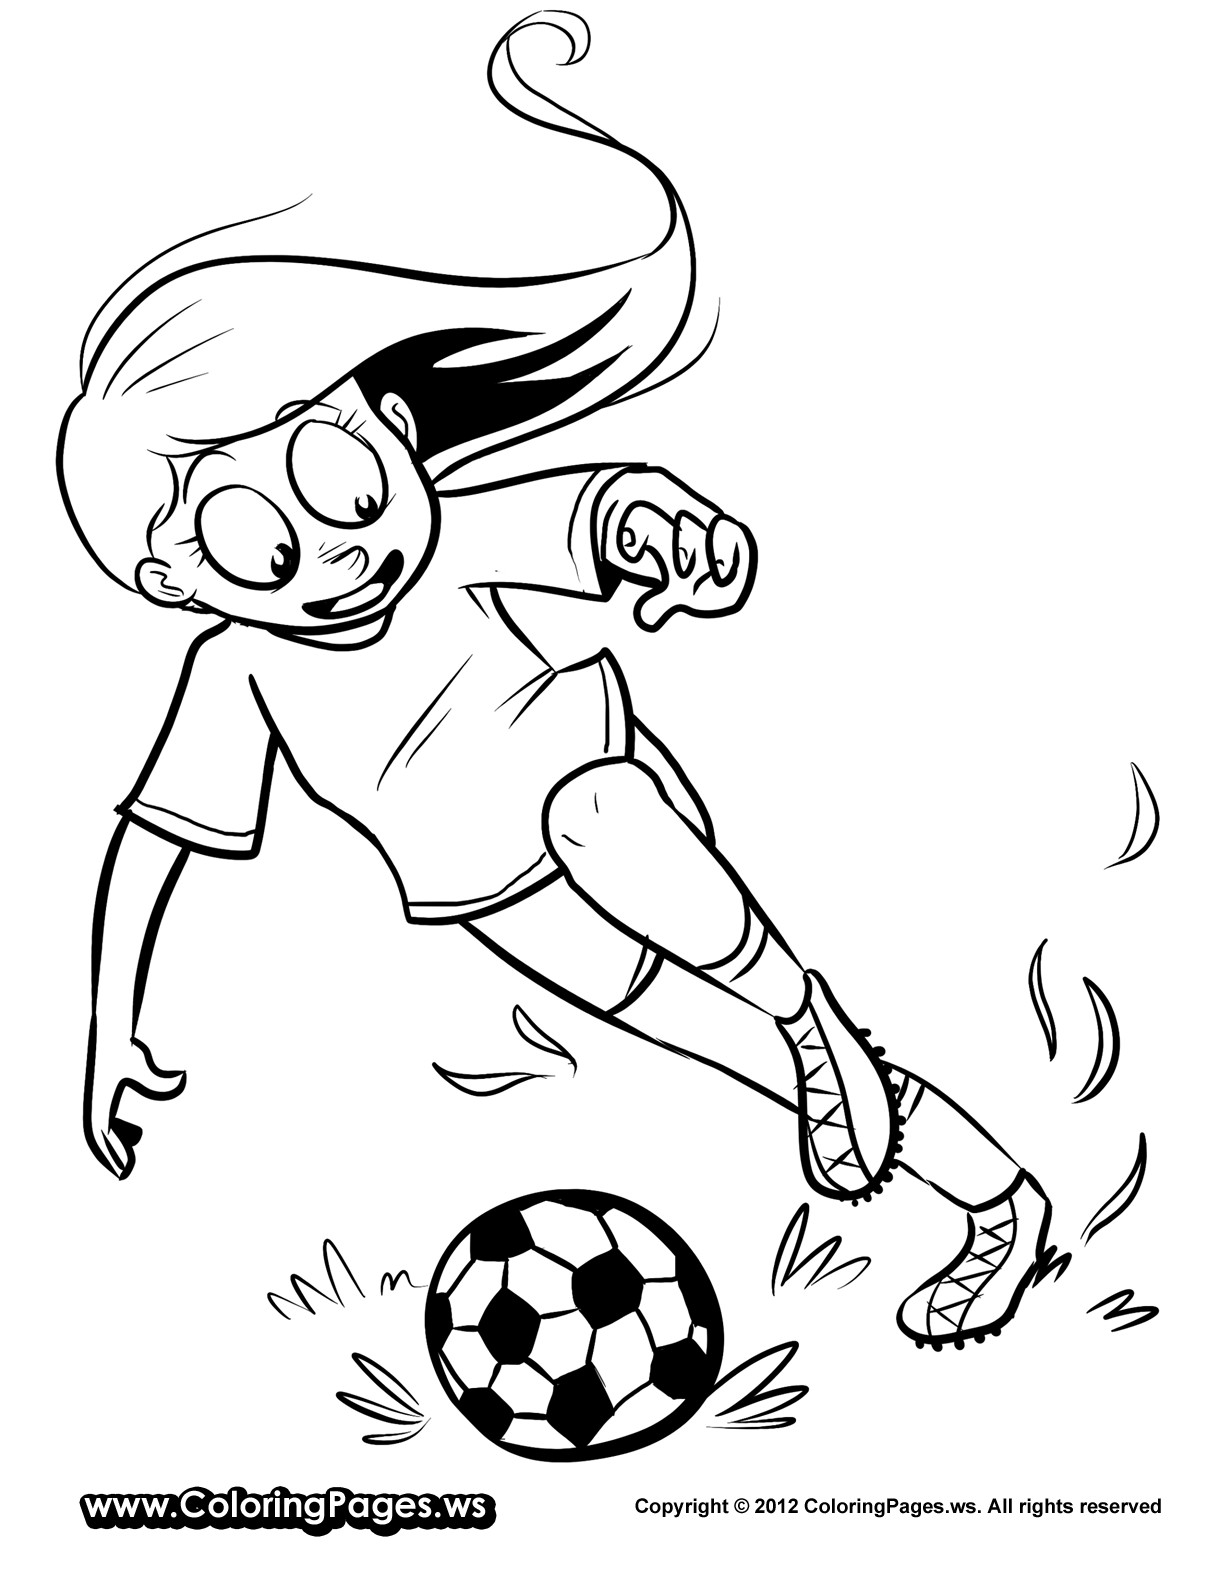 Girls Soccer Coloring Pages
 Soccer Player Coloring Pages Soccer Player